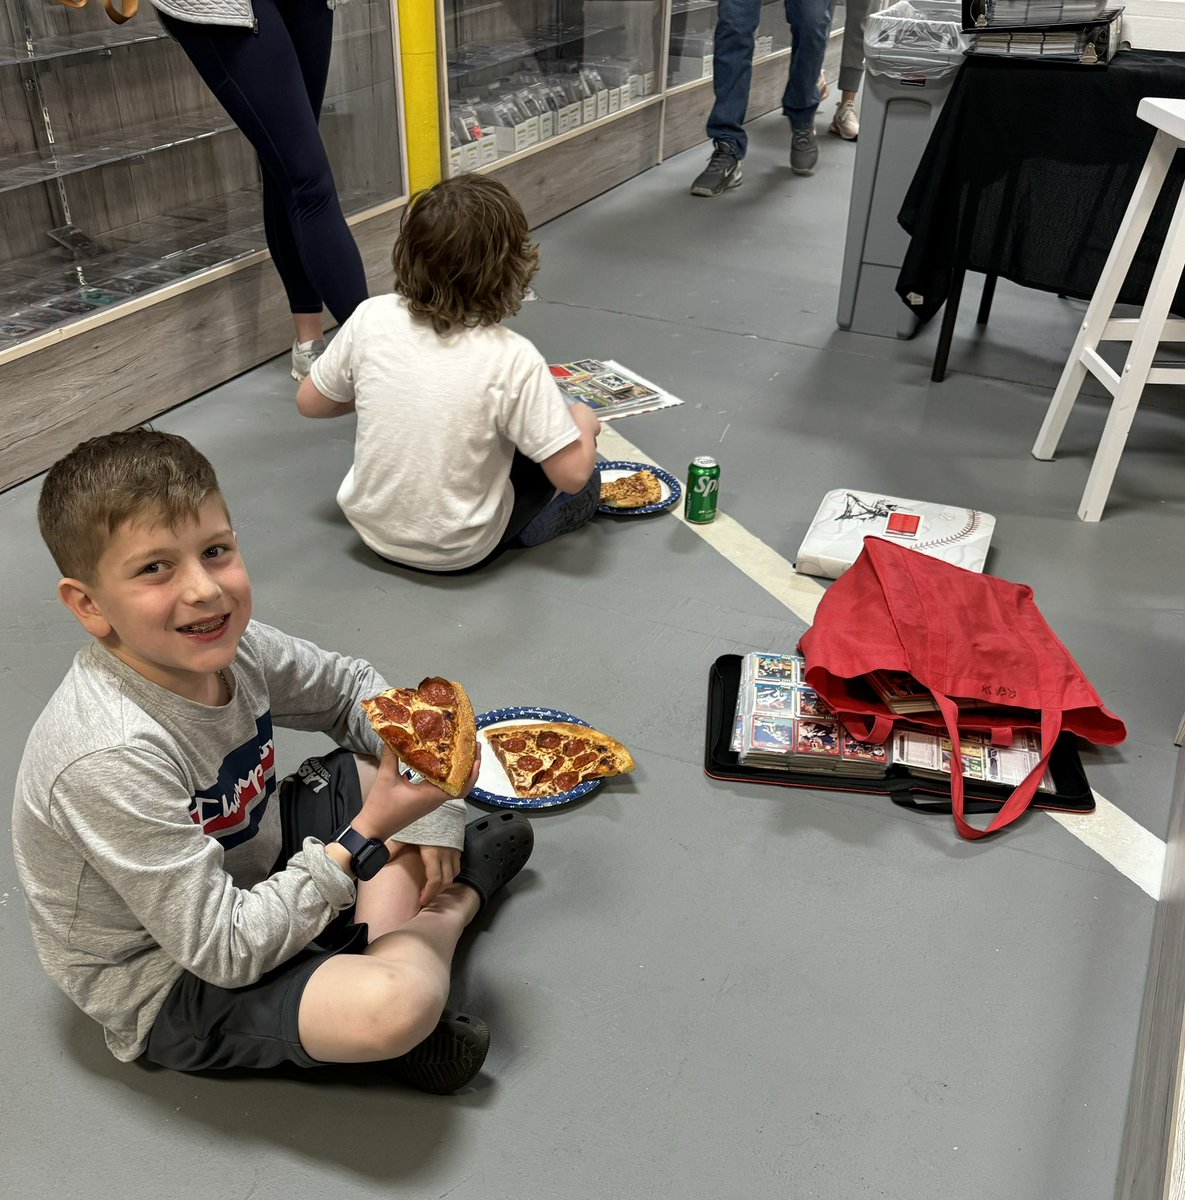 #ToppsRipNight can be exhausting! And while we have plenty of seats available, sometimes you just gotta grab a spot on the floor and enjoy some pizza!

#Topps